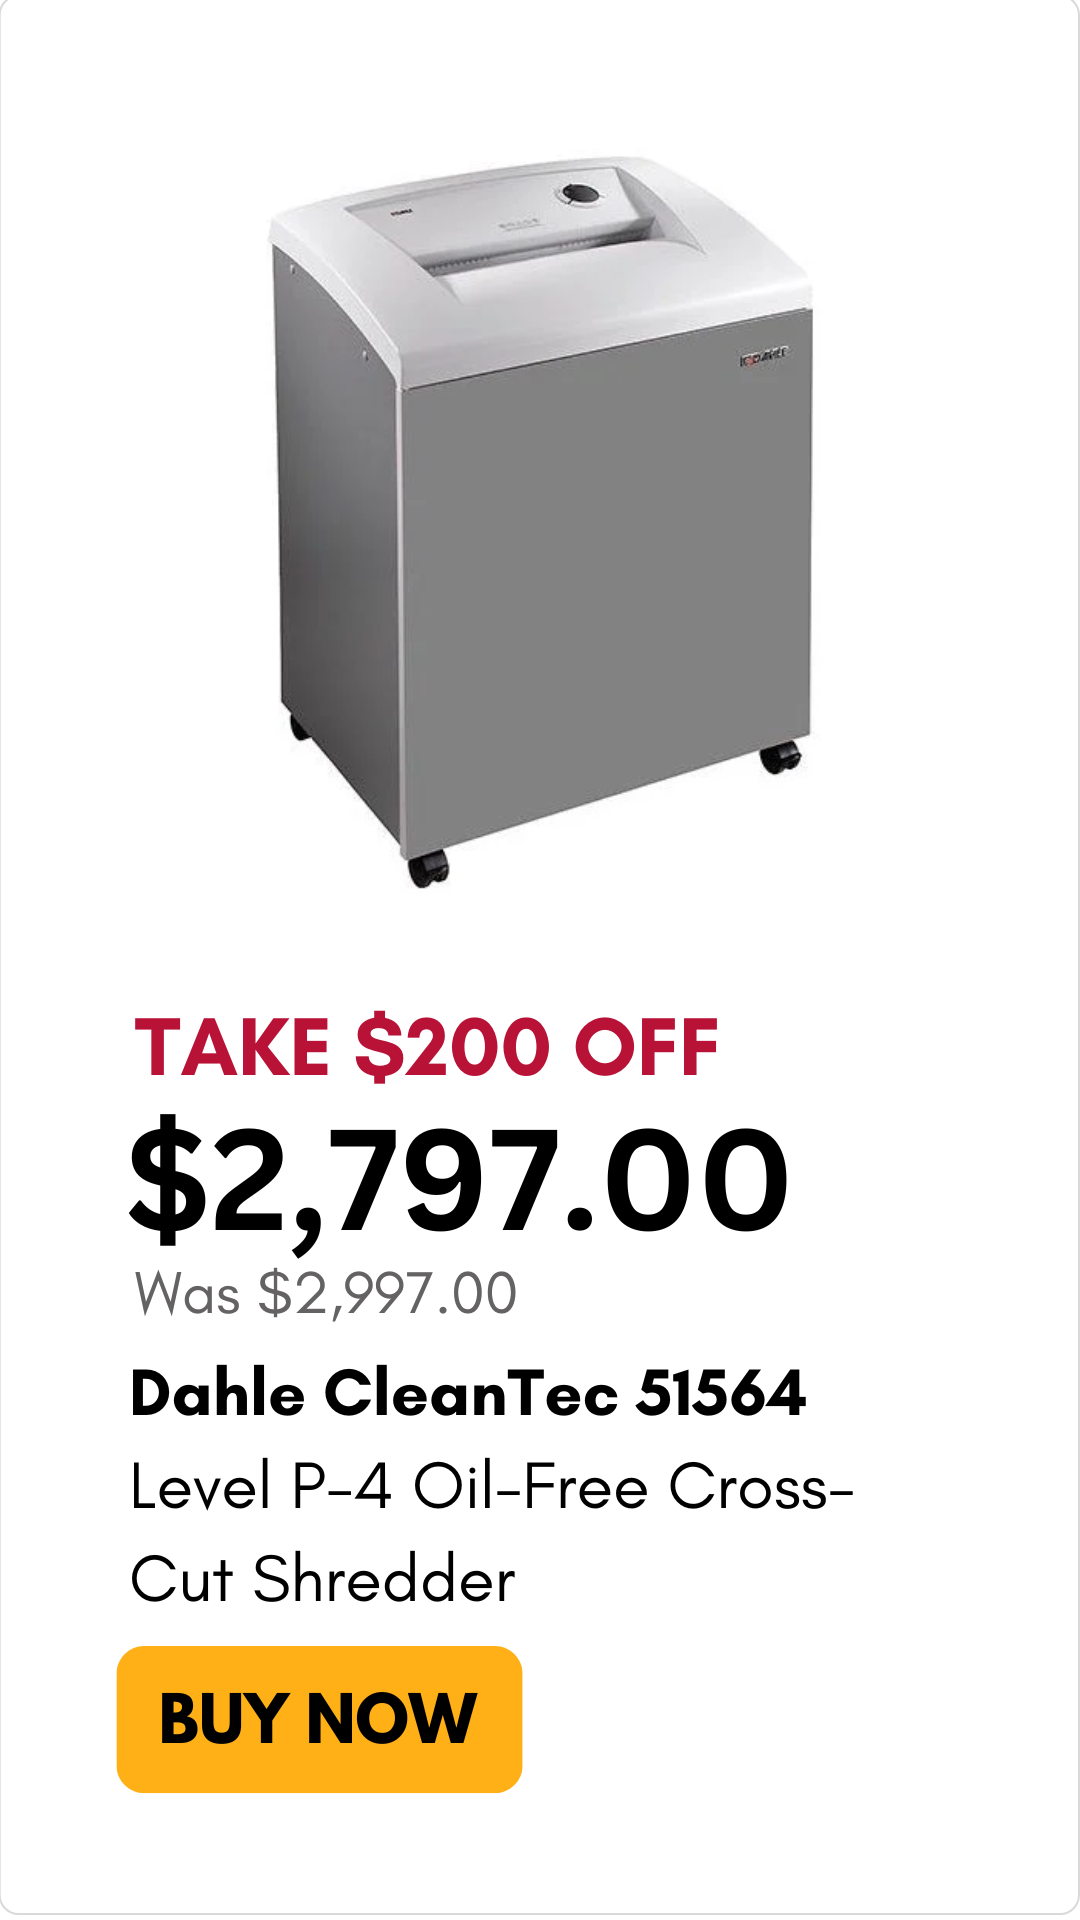 Dahle CleanTec 51564 Level P-4 Oil-Free Cross-Cut Department Shredder on sale for $200 off on MyBinding.com